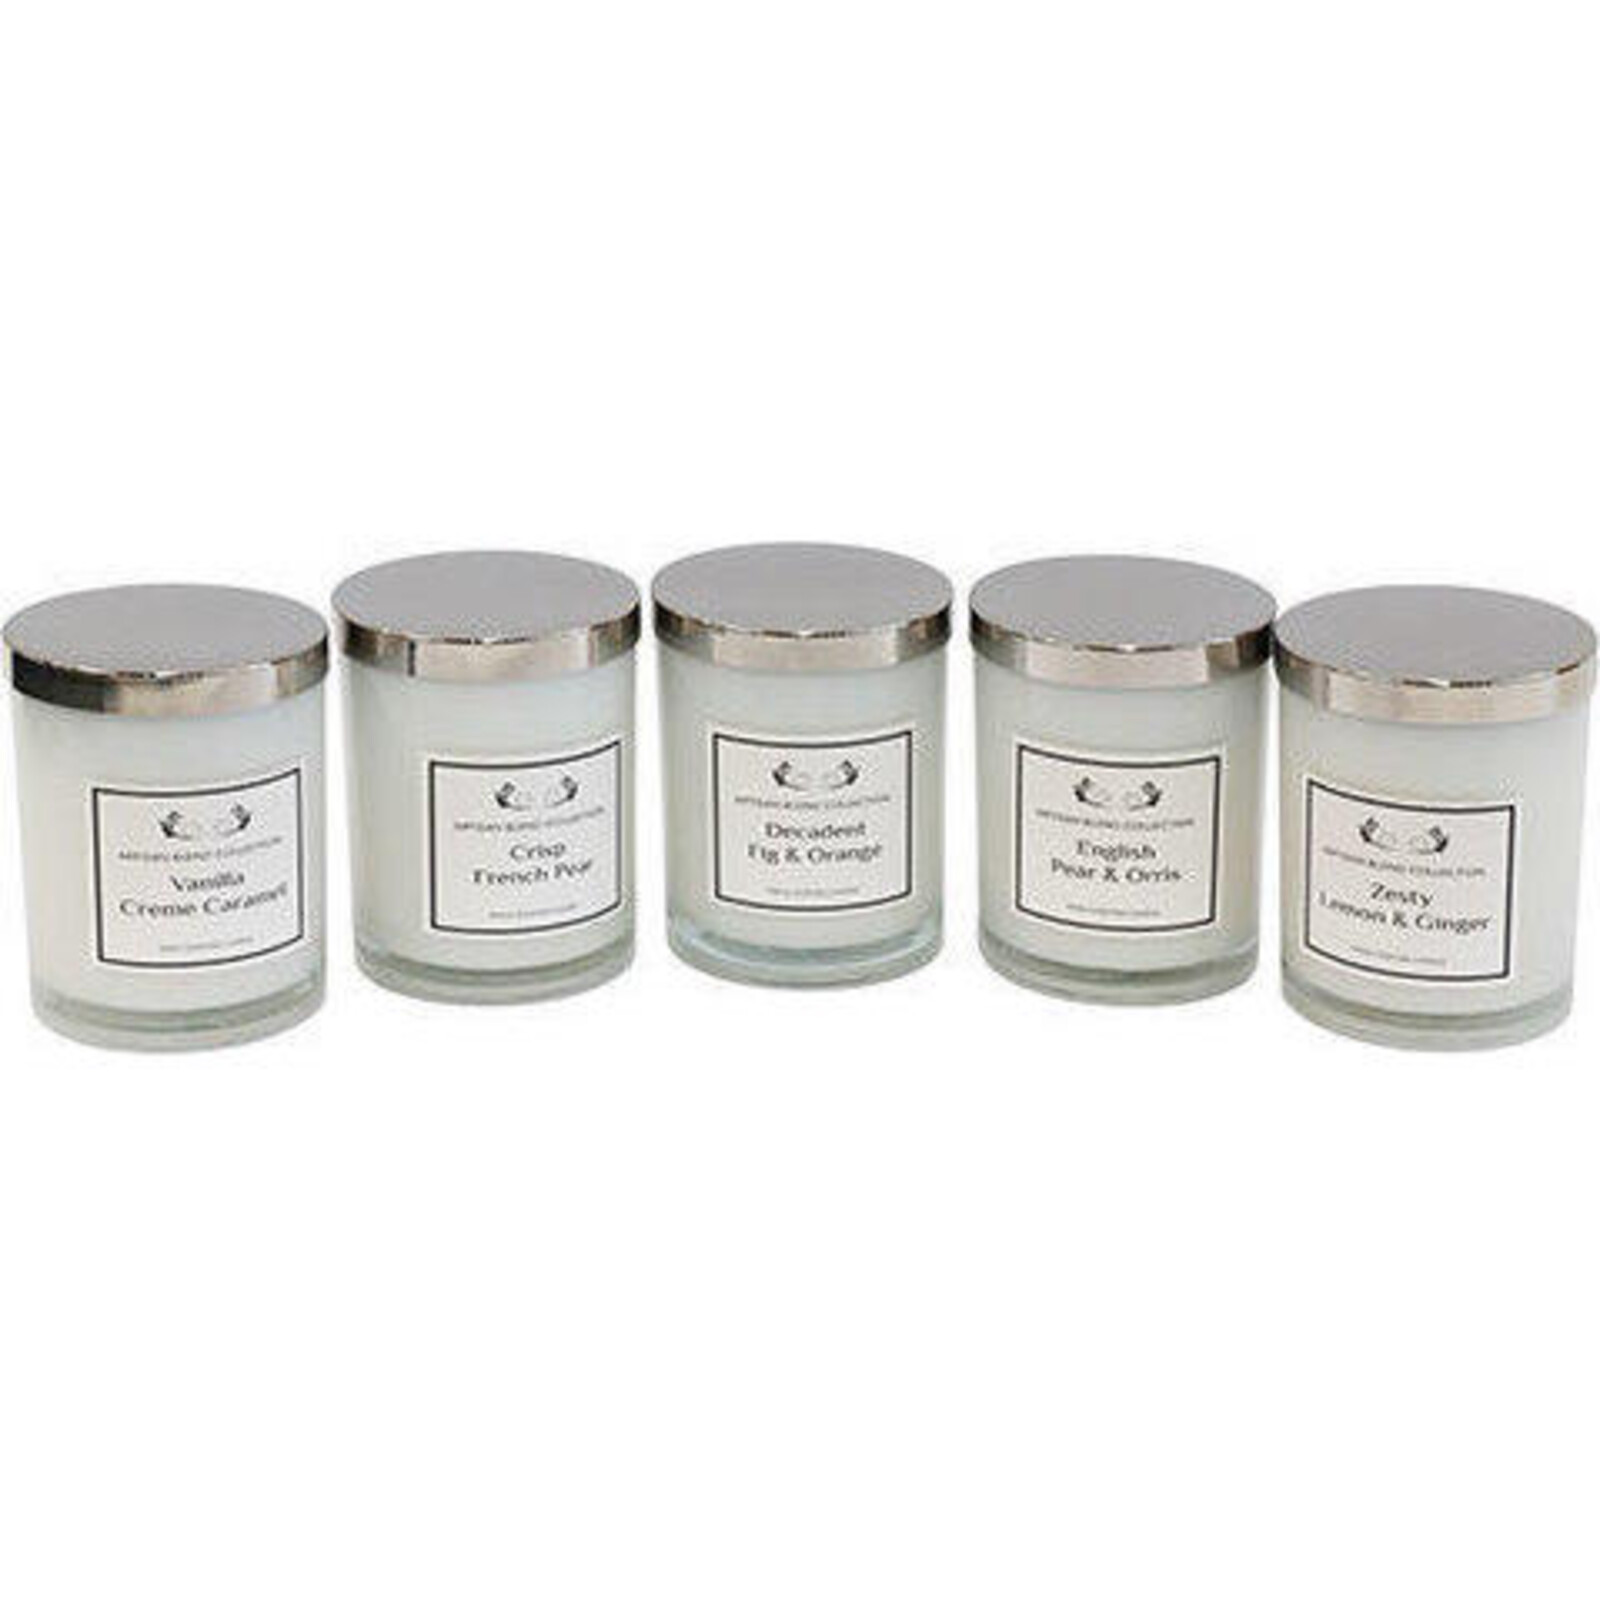 Candle Artisan Blend Crisp French Pear